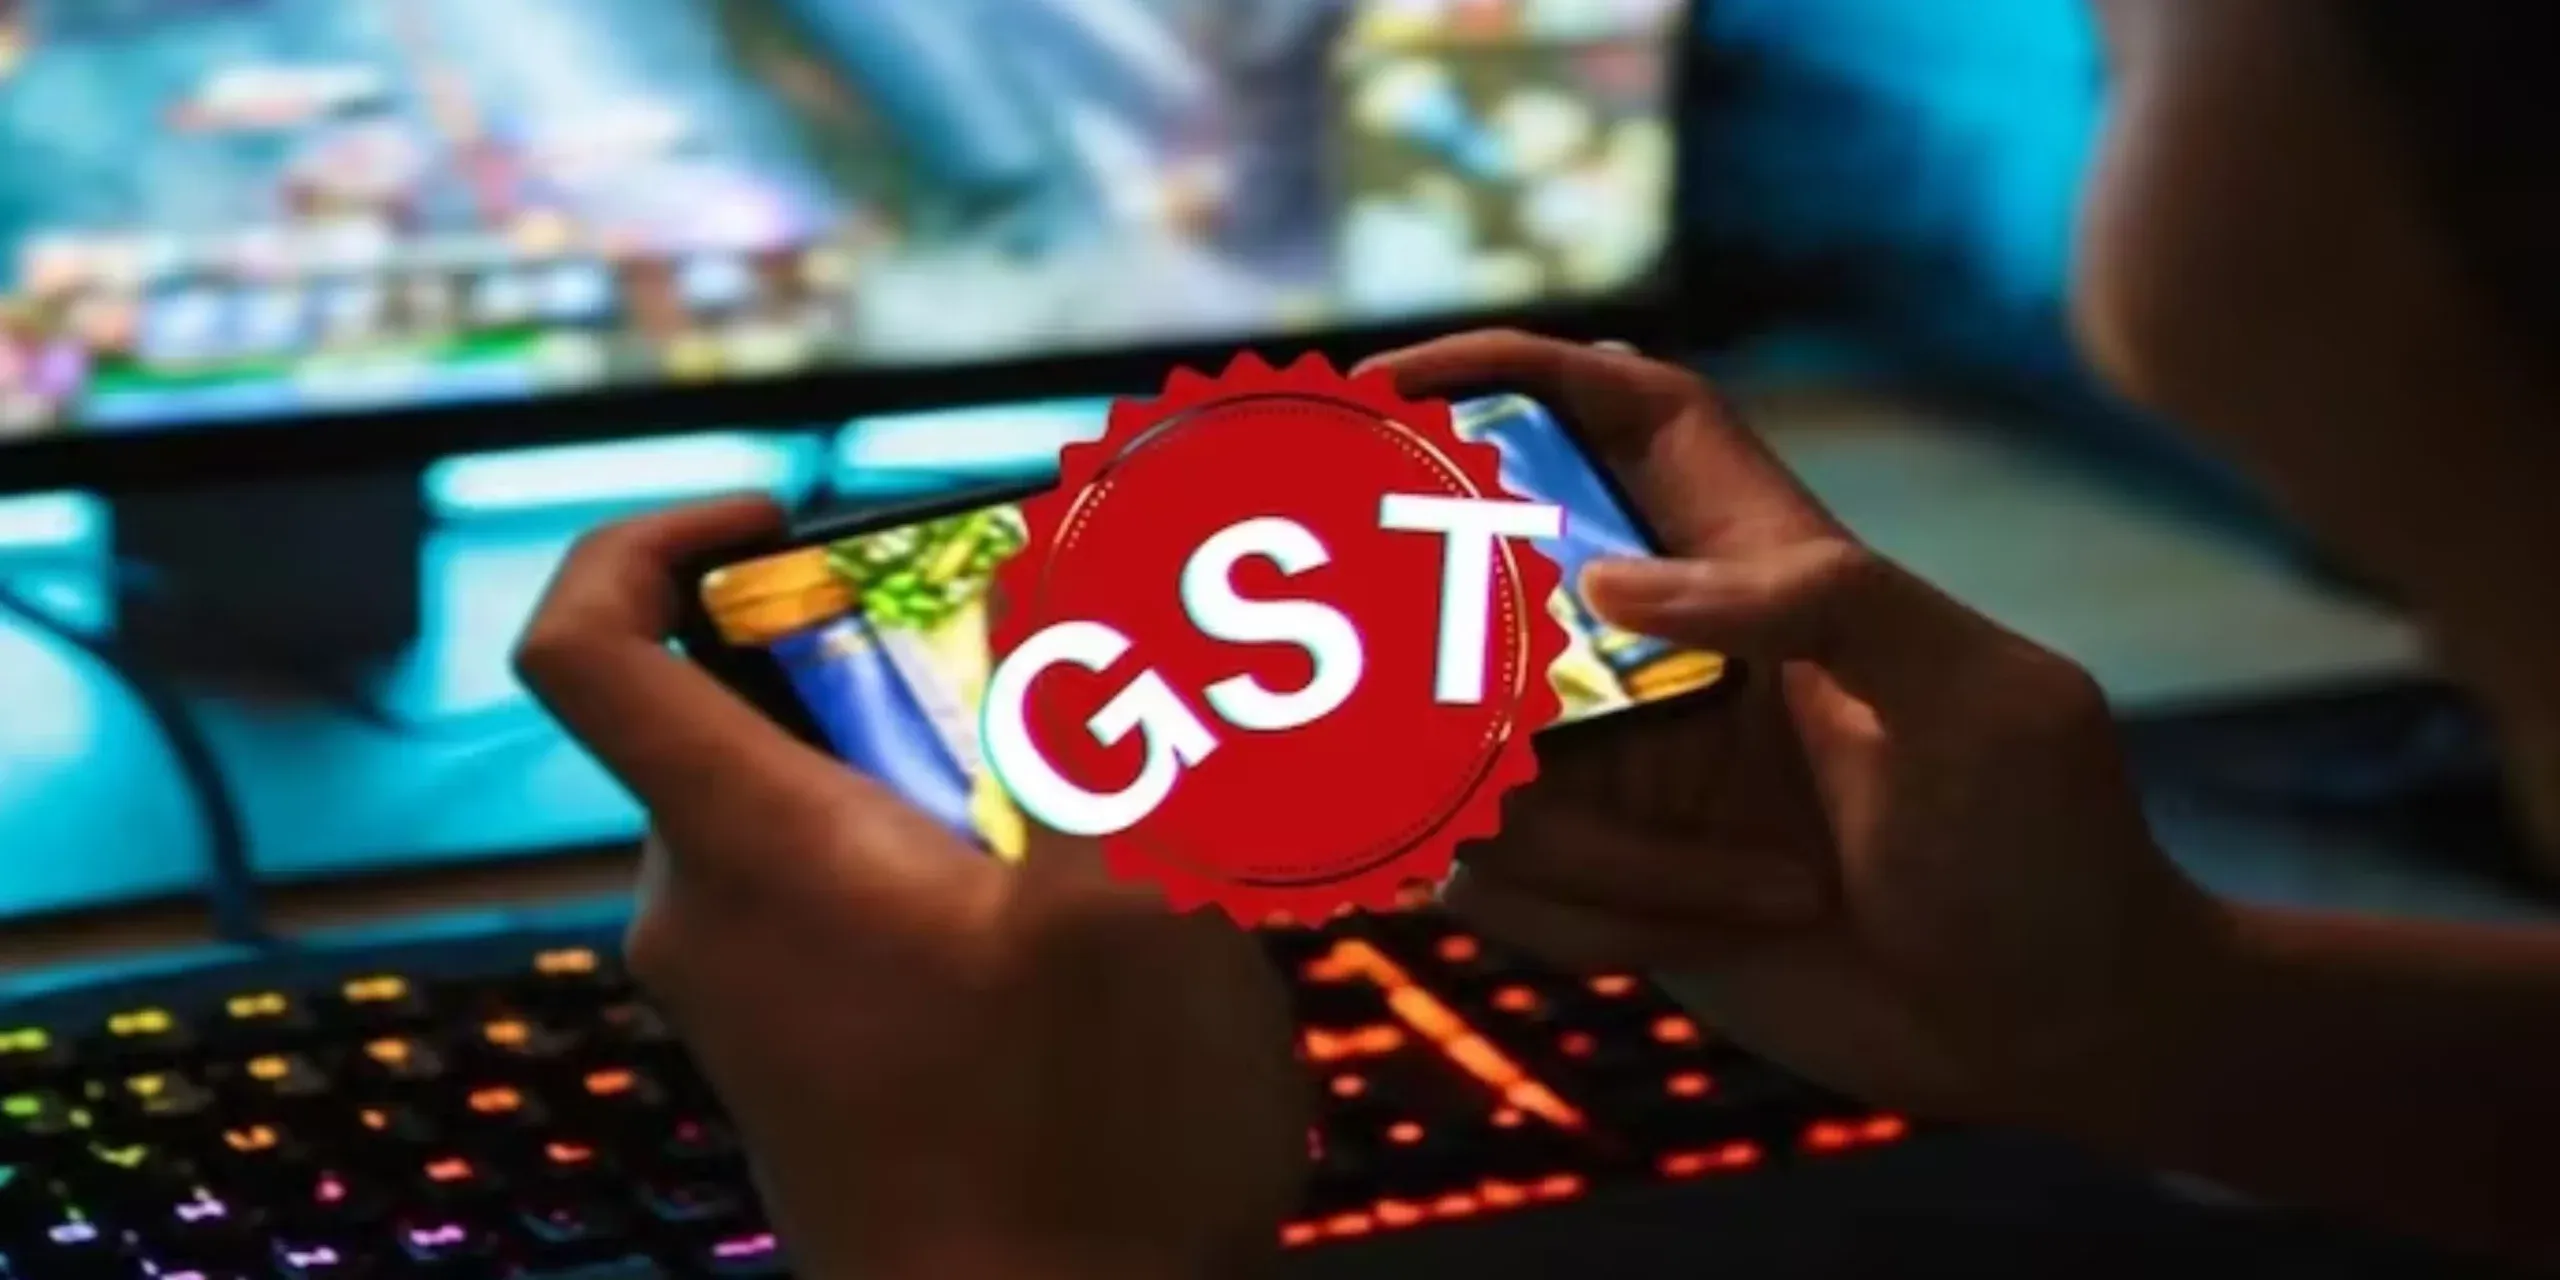 GST on online games remains vexed issue despite Council blunting its impact